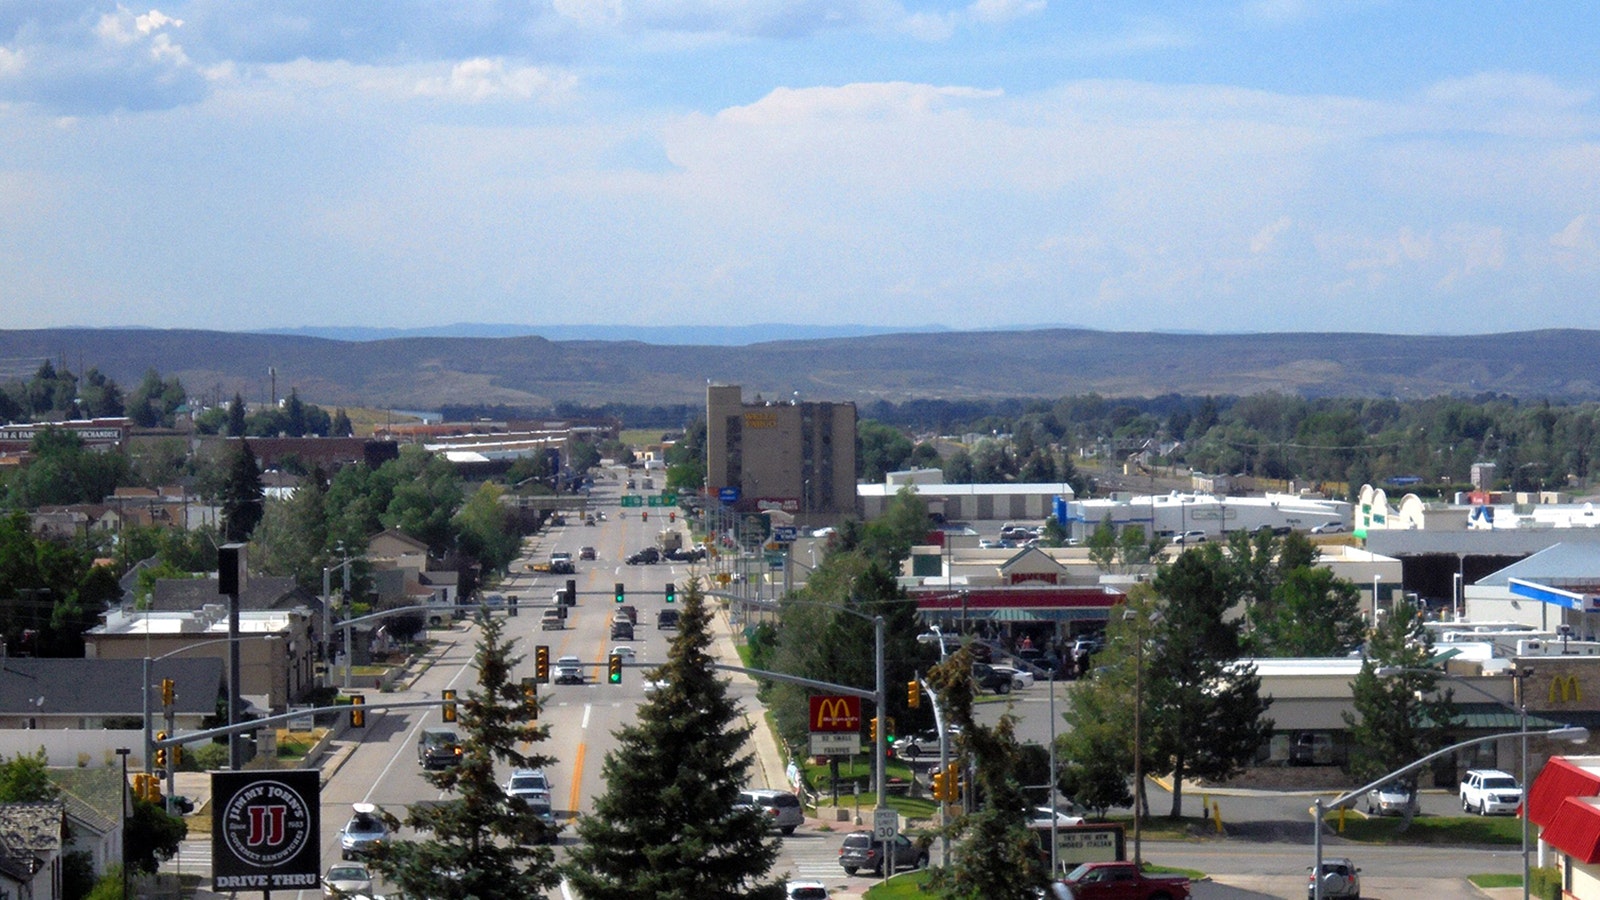 The main business district of Evanston, Wyoming.